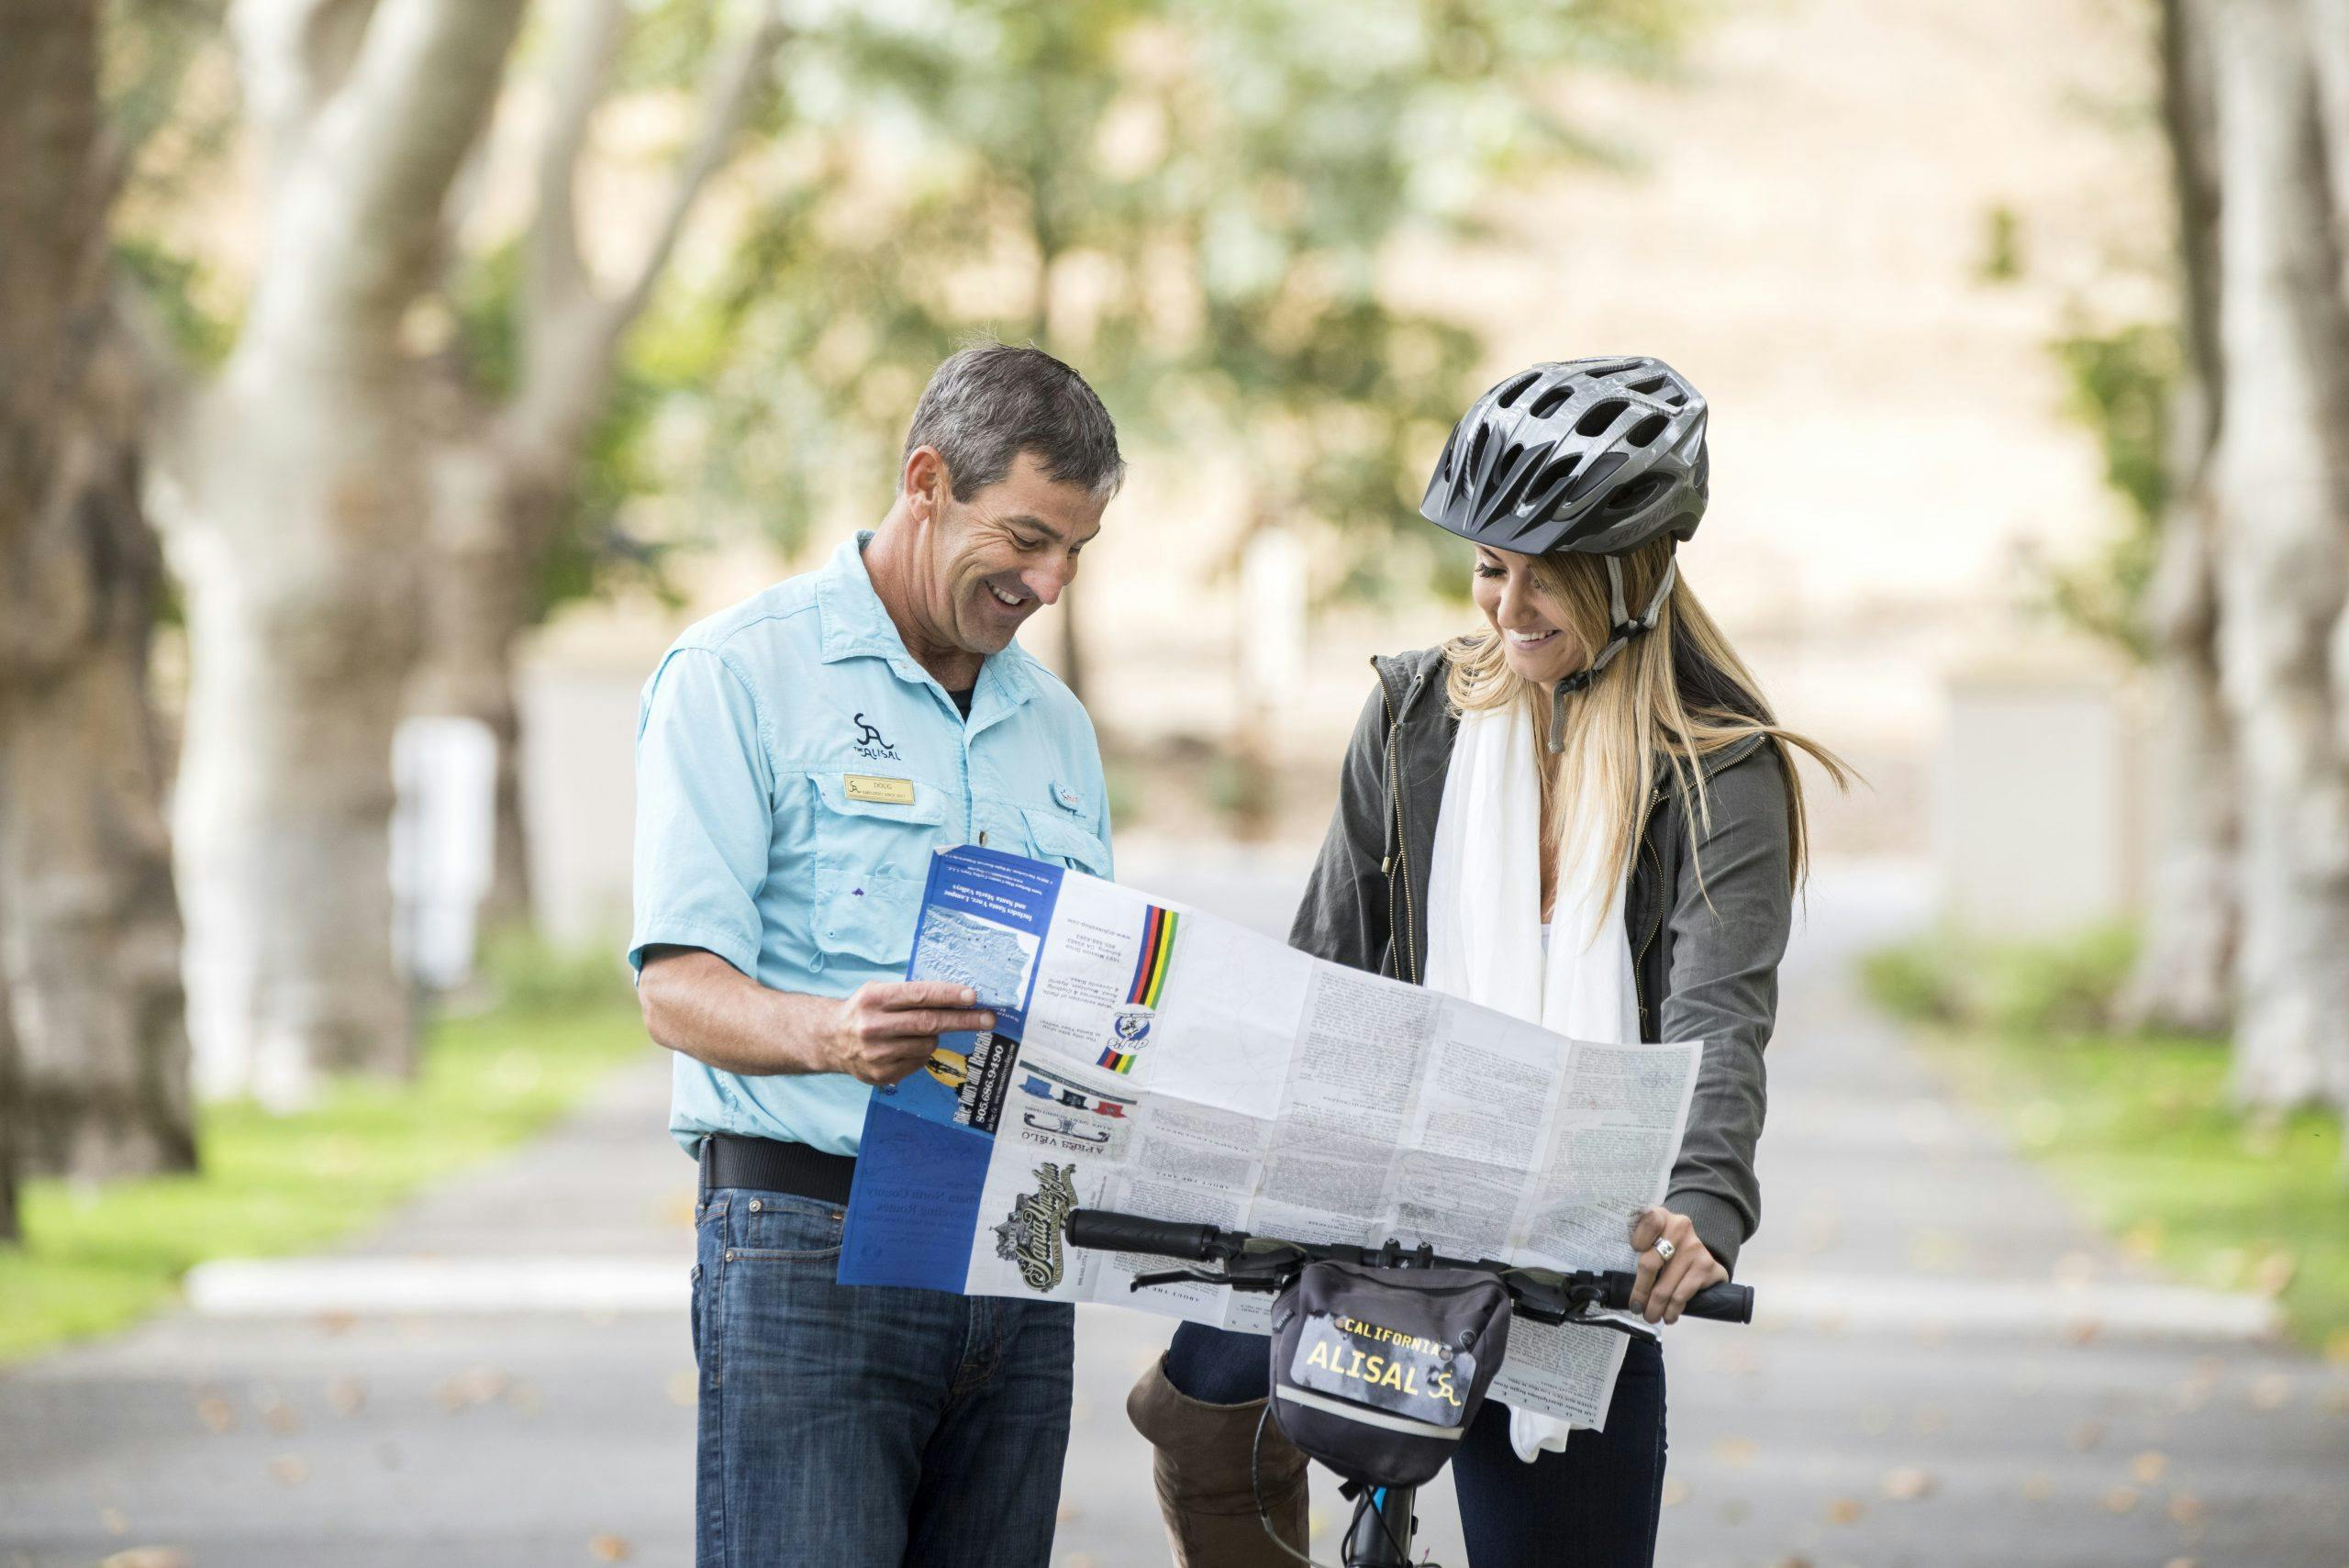 person riding a bicycle getting directions from an Alisal employee